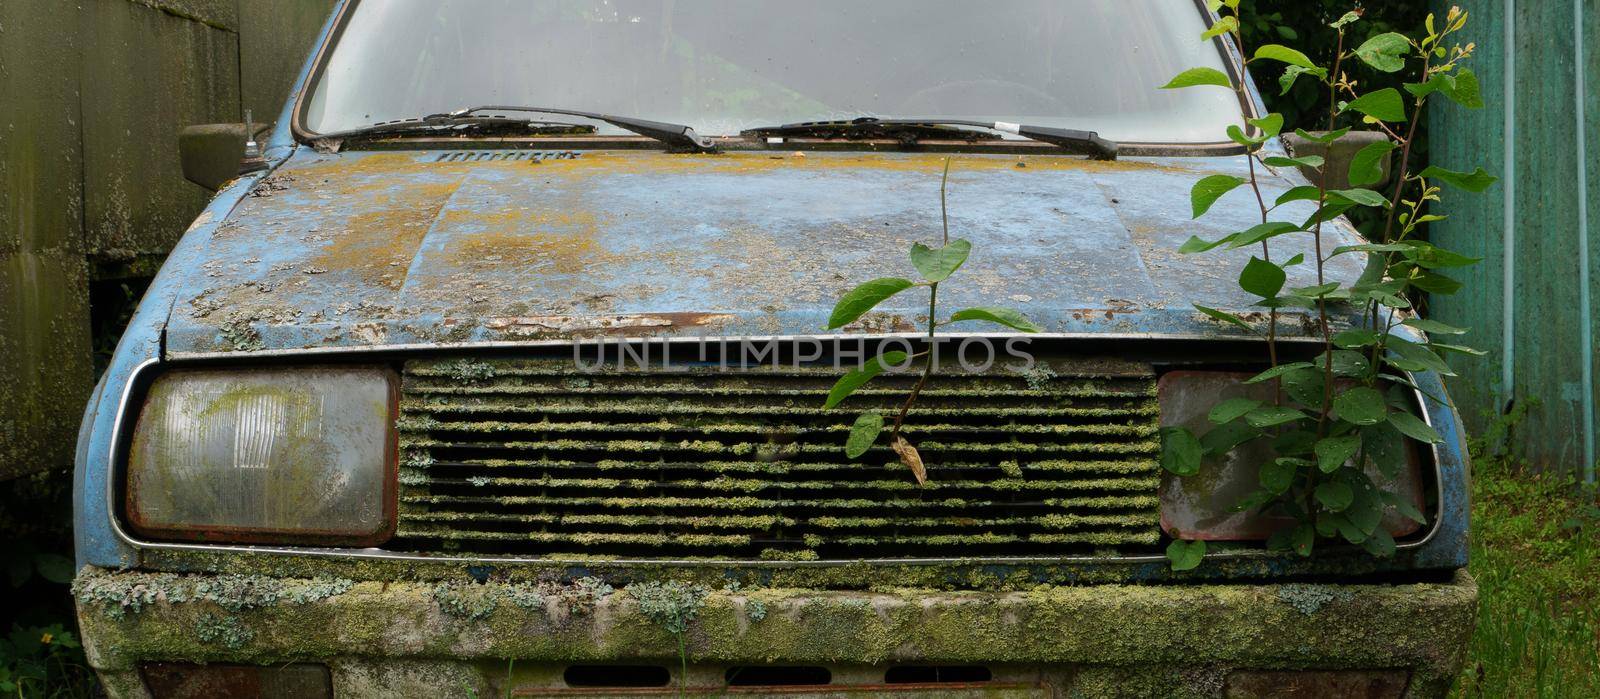 An old faulty car in an abandoned farm. by gelog67